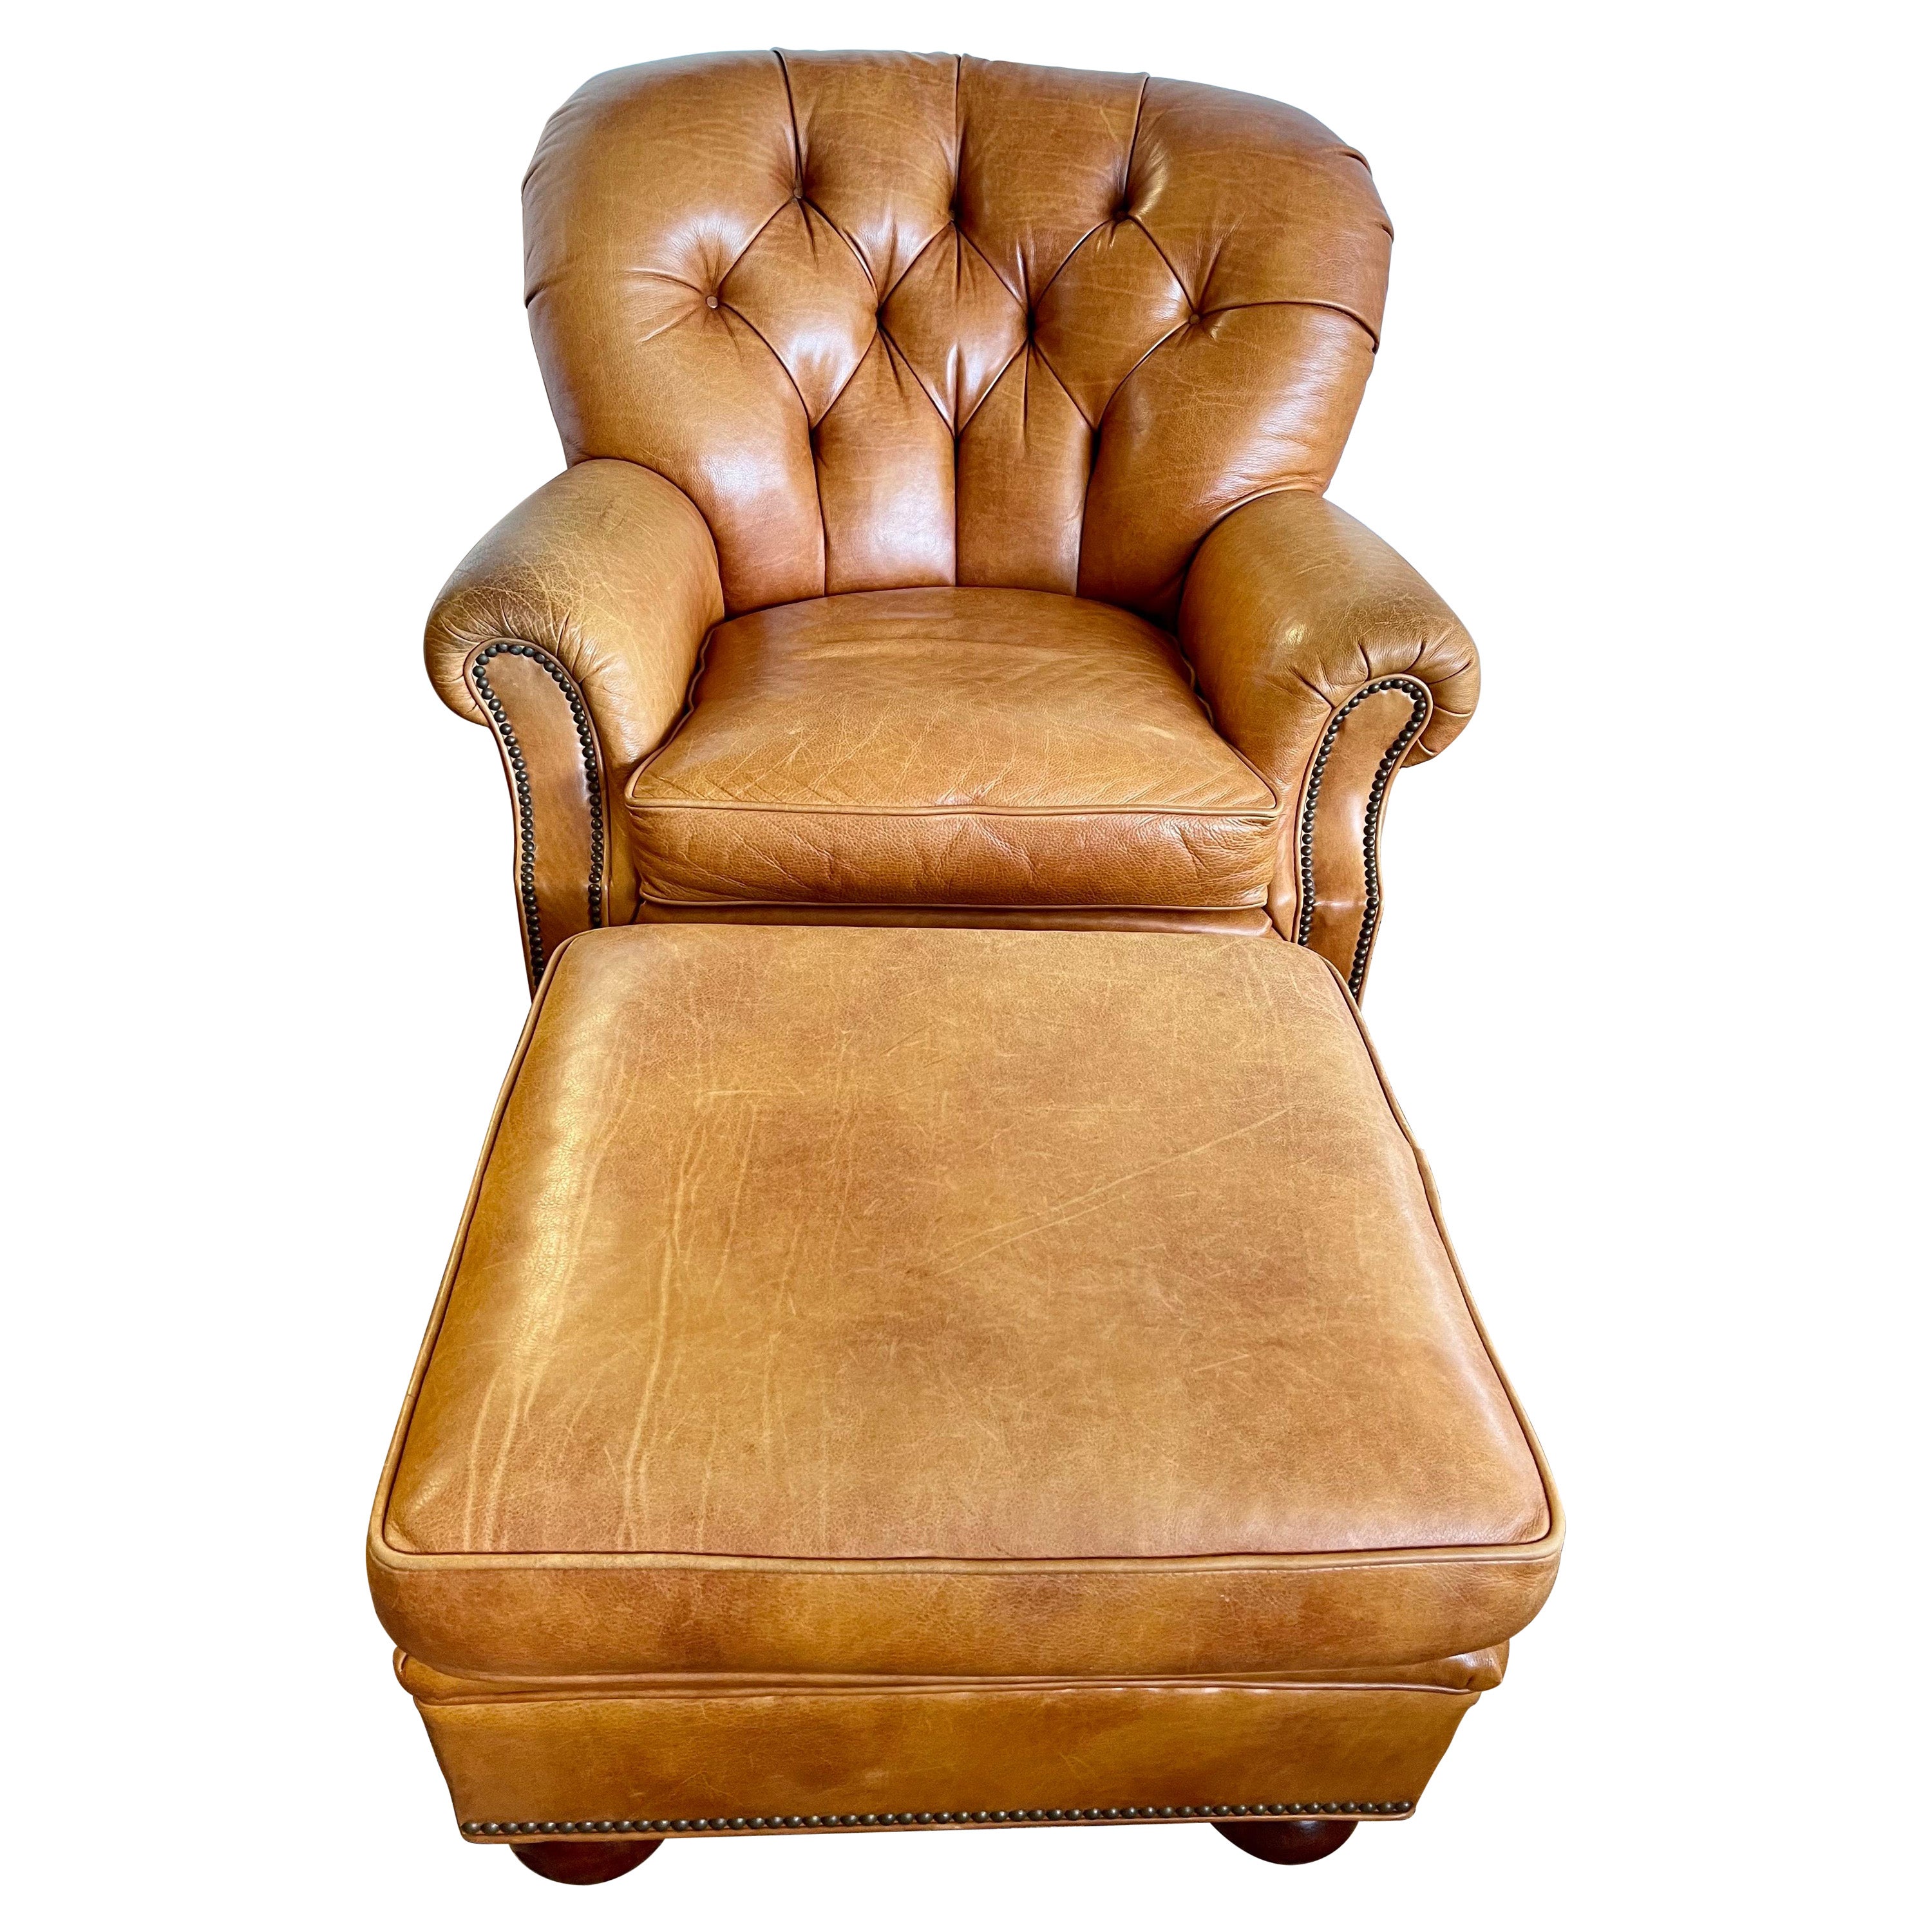 Hickory Chair Vintage Leather Chesterfield Wingback Tufted Chair & Ottoman